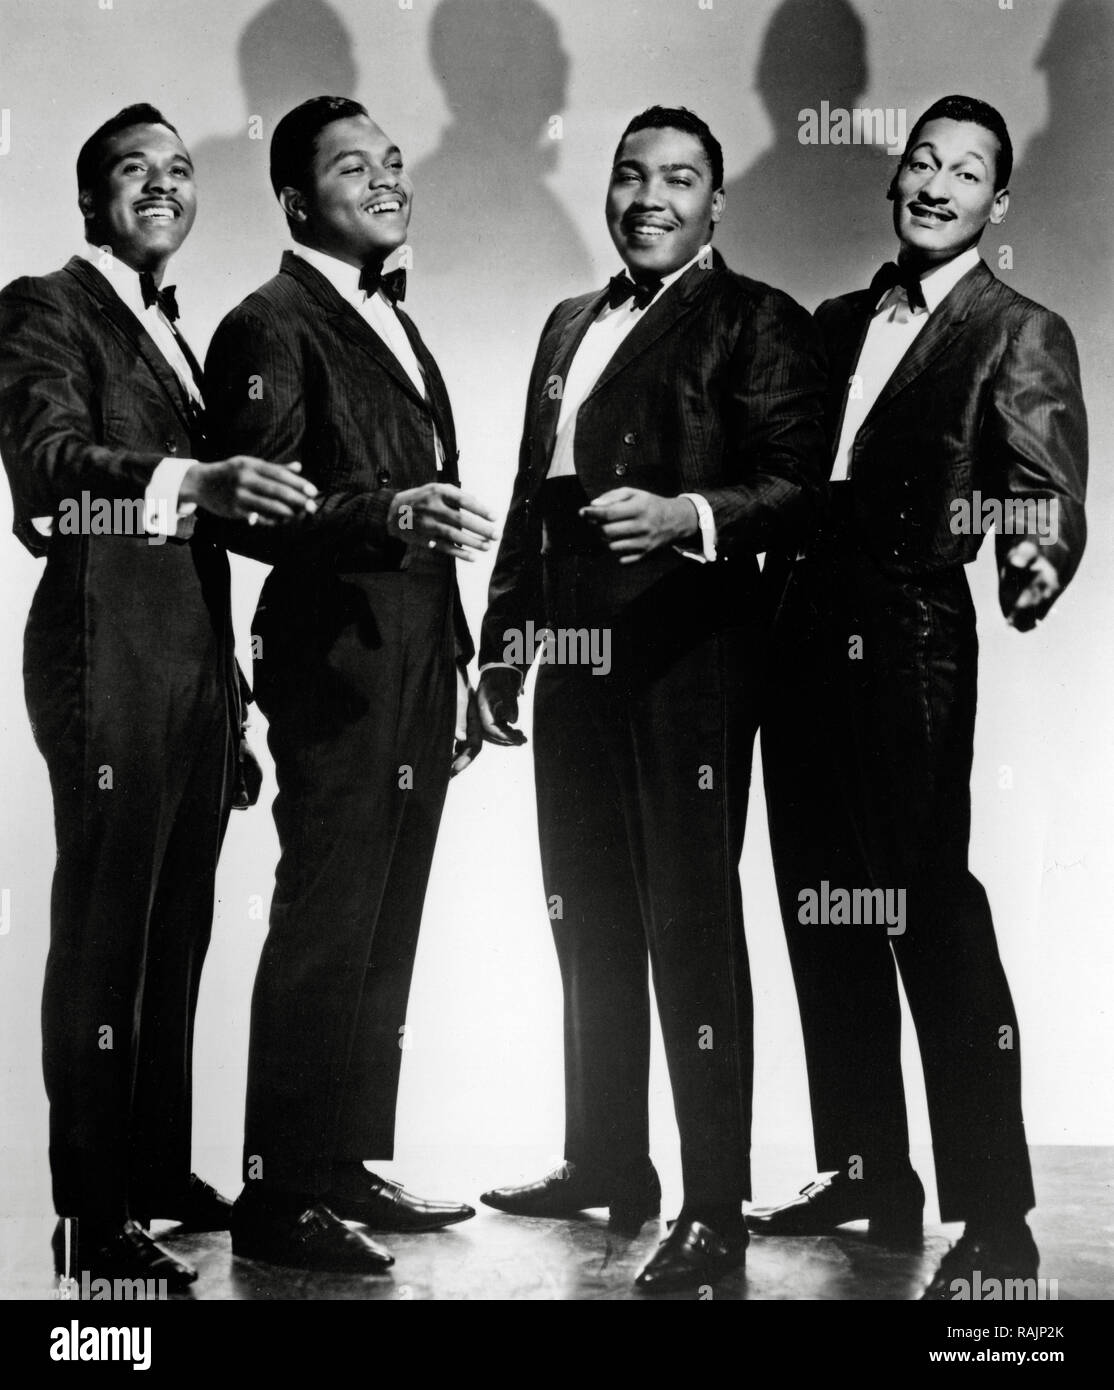 Publicity photo of The Four Tops,  circa 1966    File Reference # 33636 963THA Stock Photo